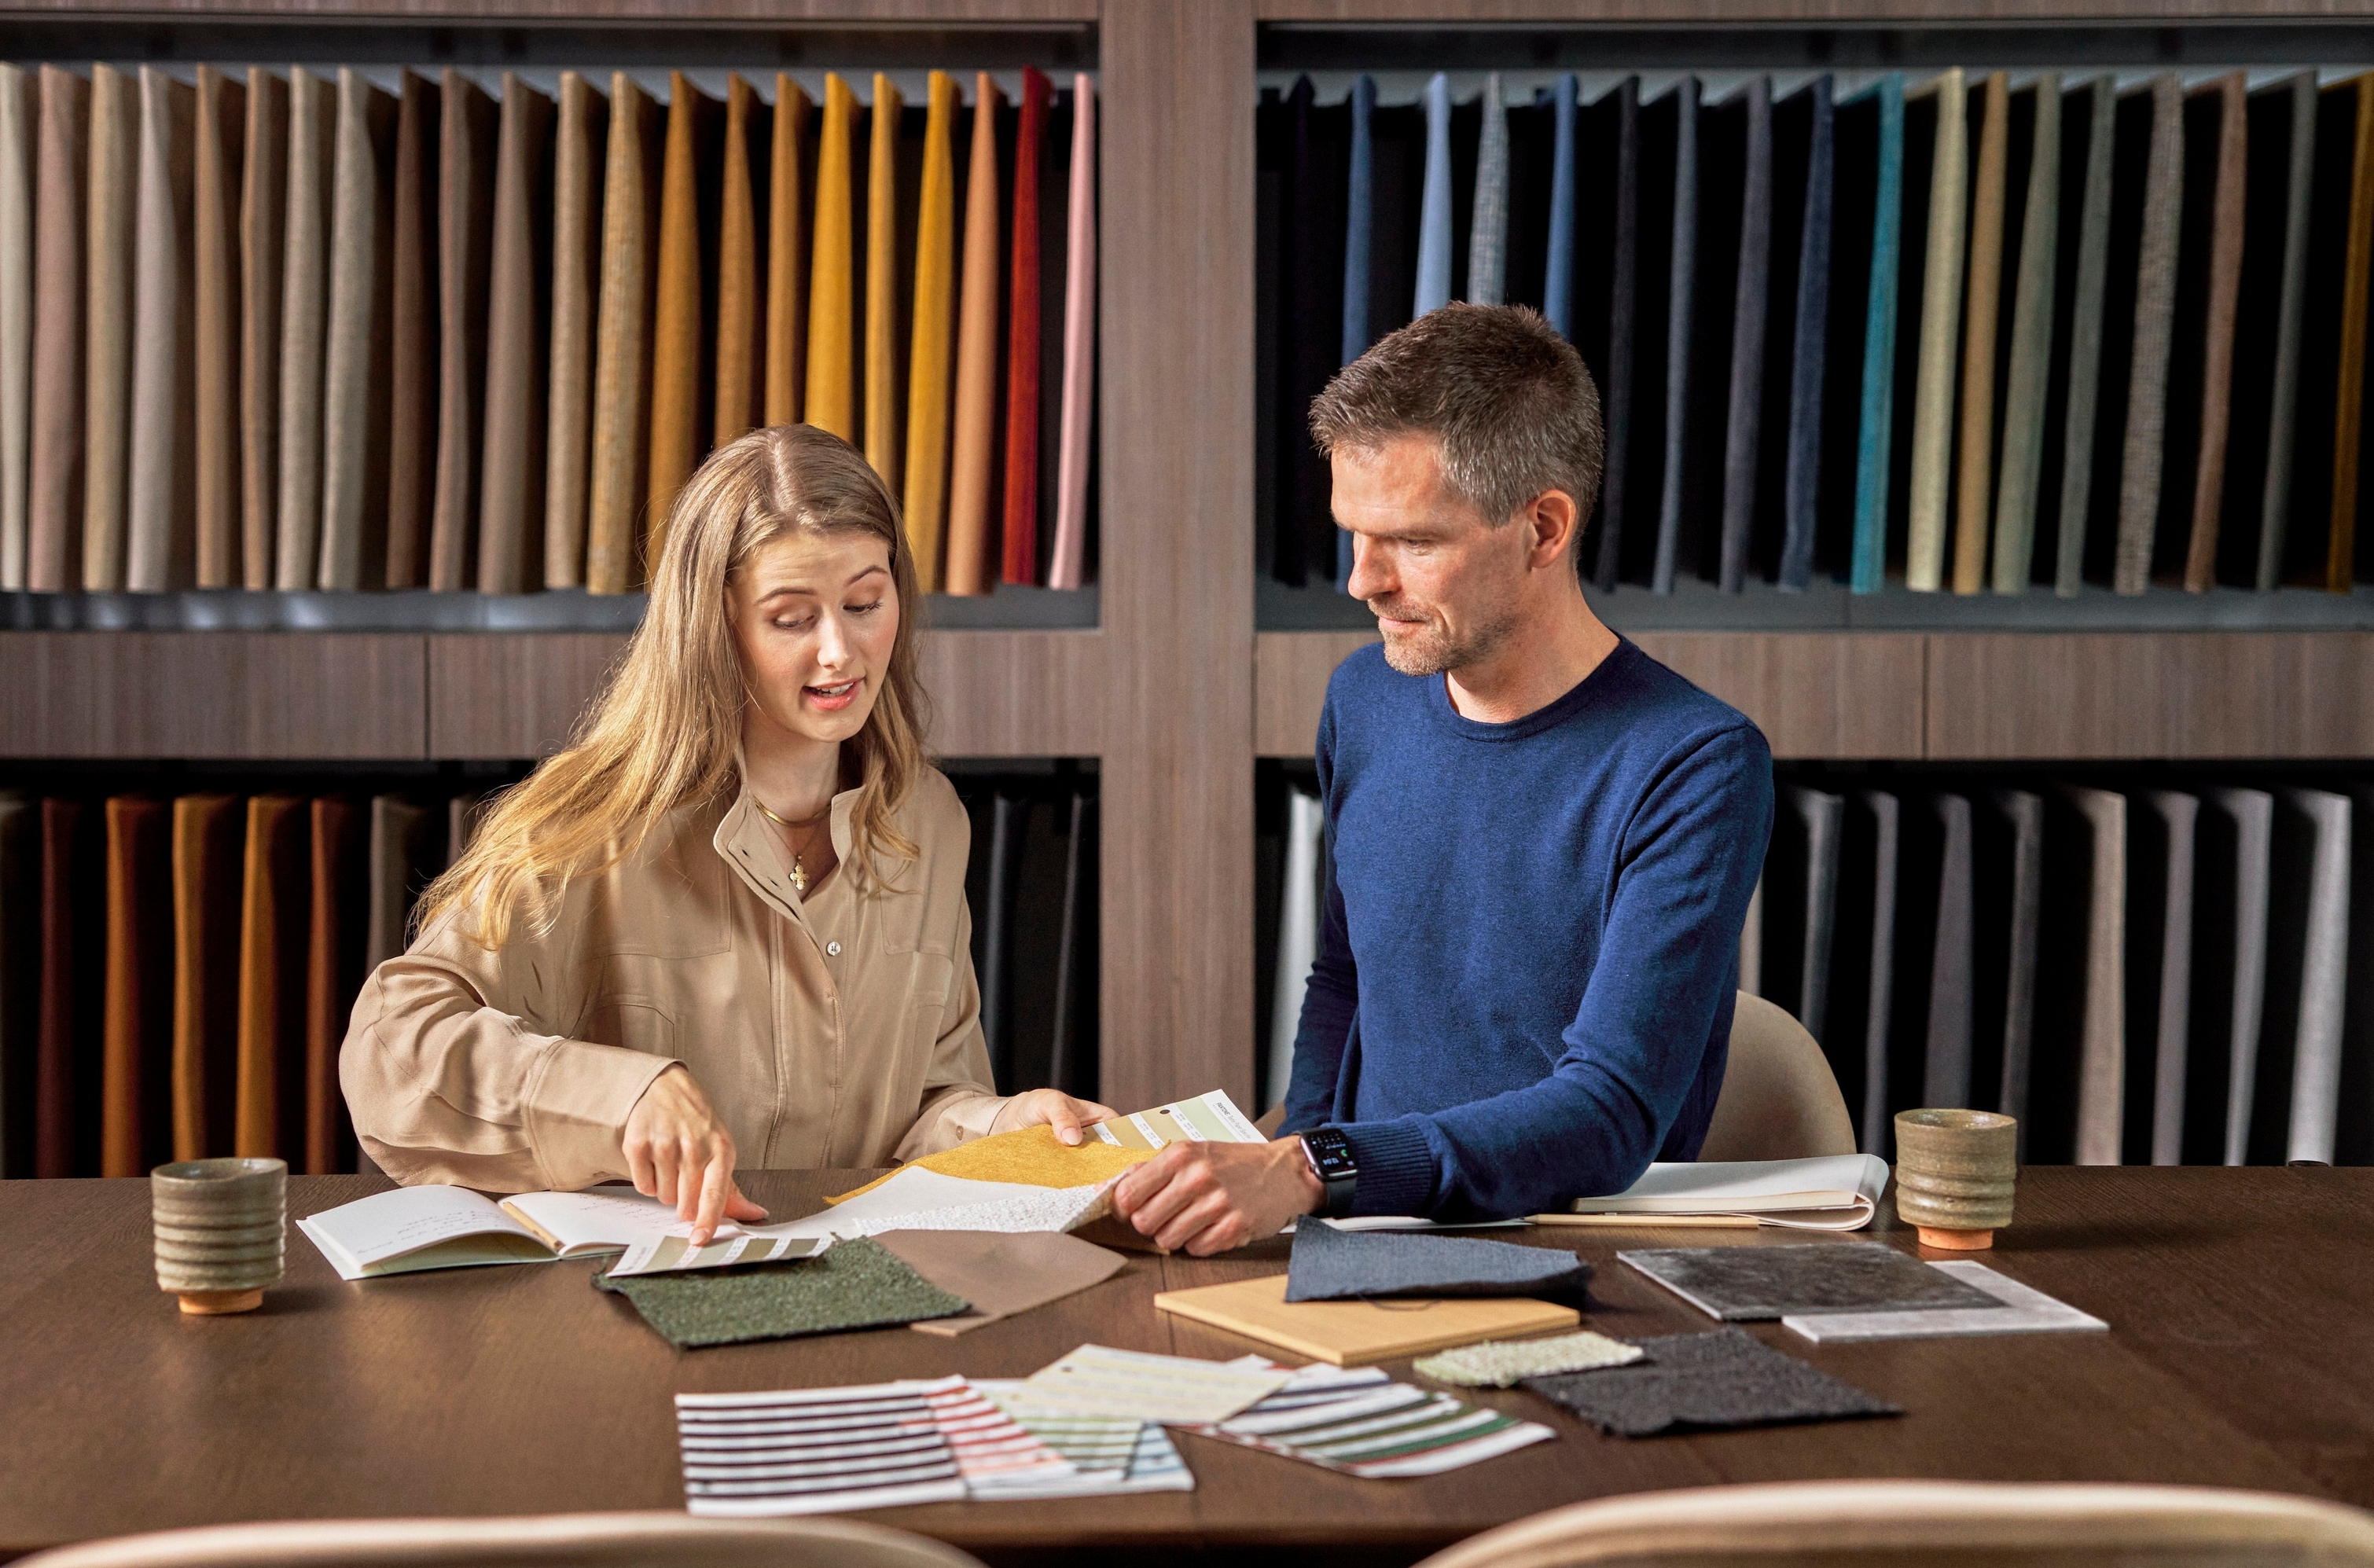 Two people examining fabric samples at a table with color swatches in the background